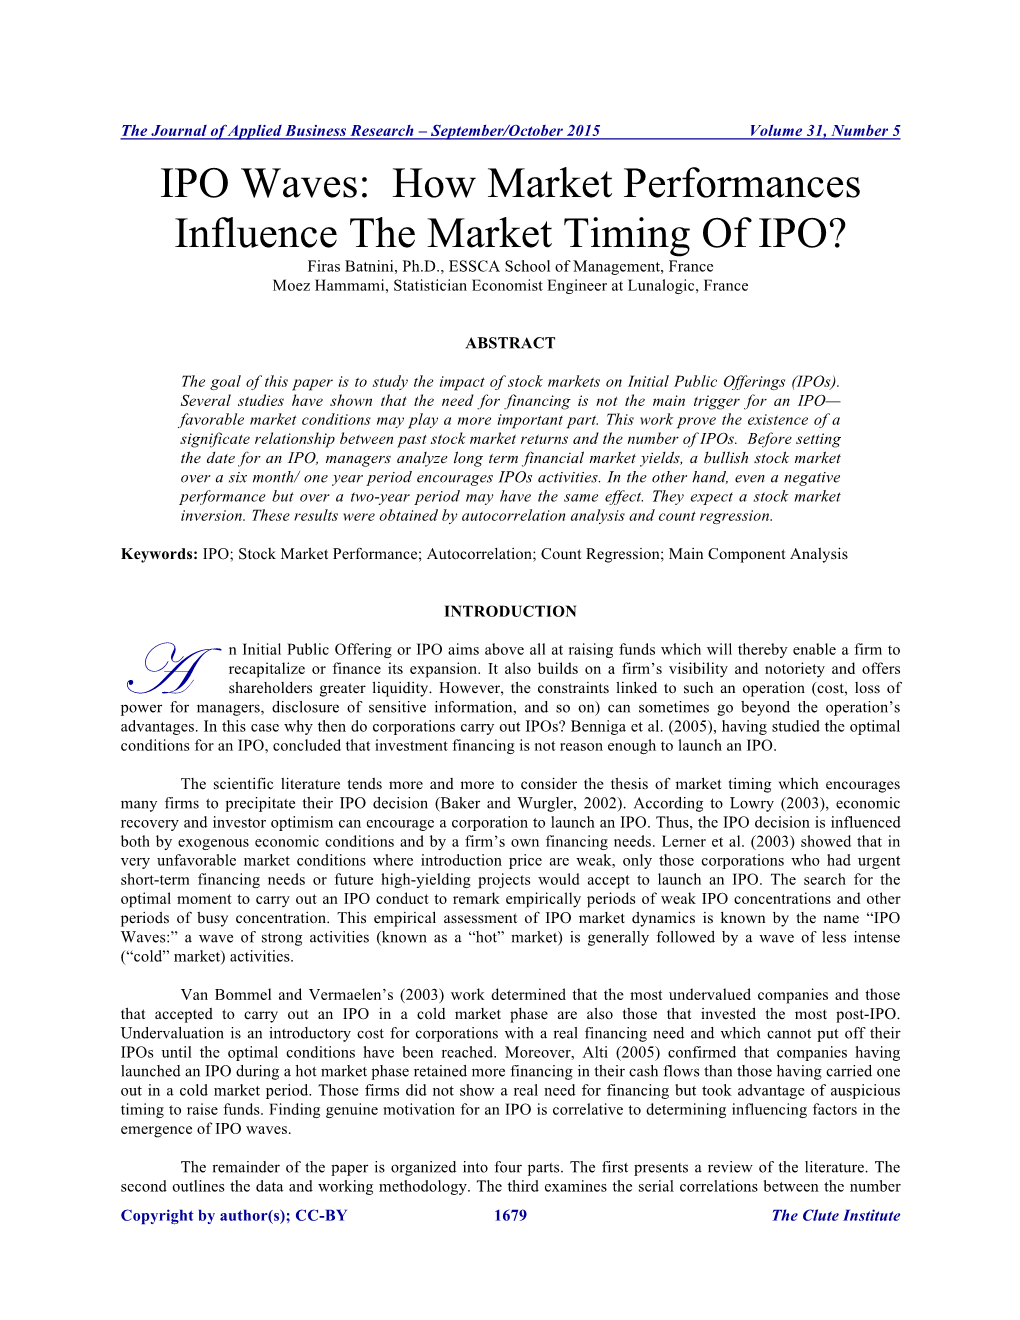 IPO Waves: How Market Performances Influence the Market Timing of IPO?